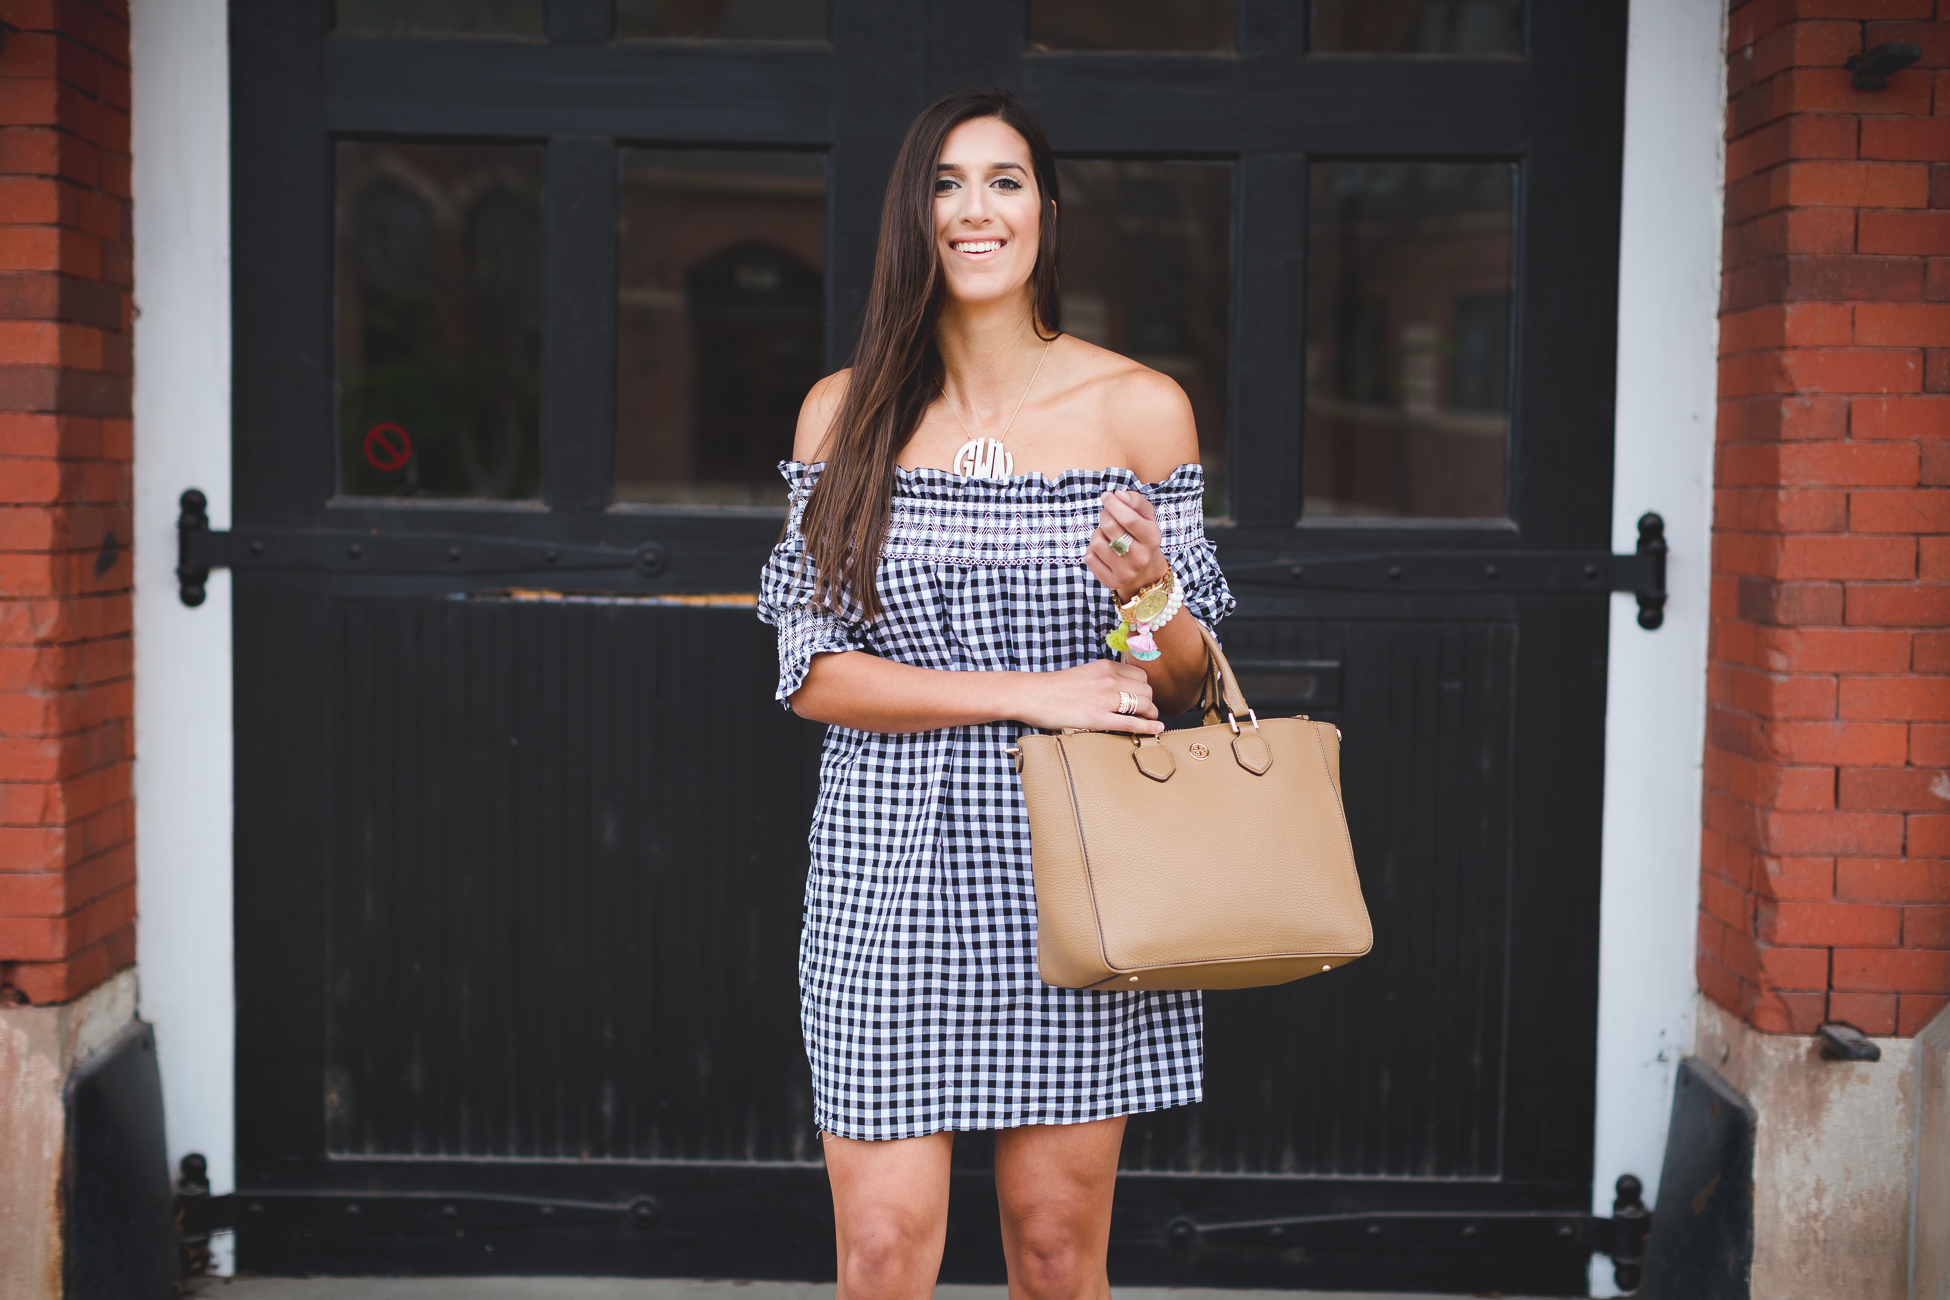 gingham dress, gingham print dress, gingham print off the shoulder dress, gingham print off the shoulder dress, preppy dress, large acrylic monogram necklace, steve madden stecy sandal, spring style, spring fashion, spring outfit ideas, date night outfit ideas // grace wainwright from a southern drawl